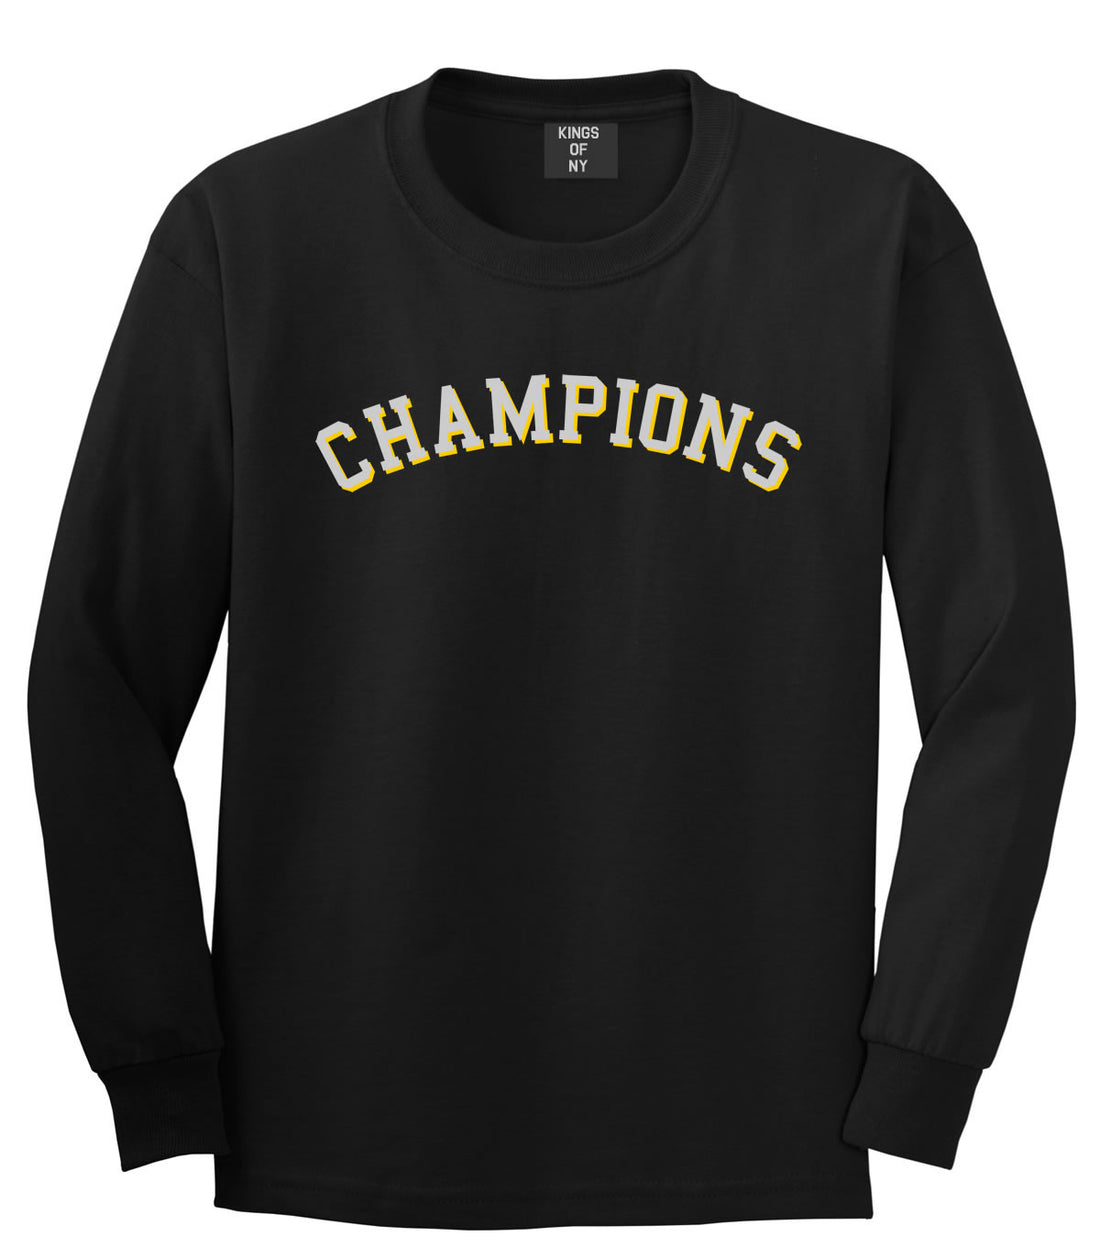 Champions Long Sleeve T-Shirt in Black by Kings Of NY